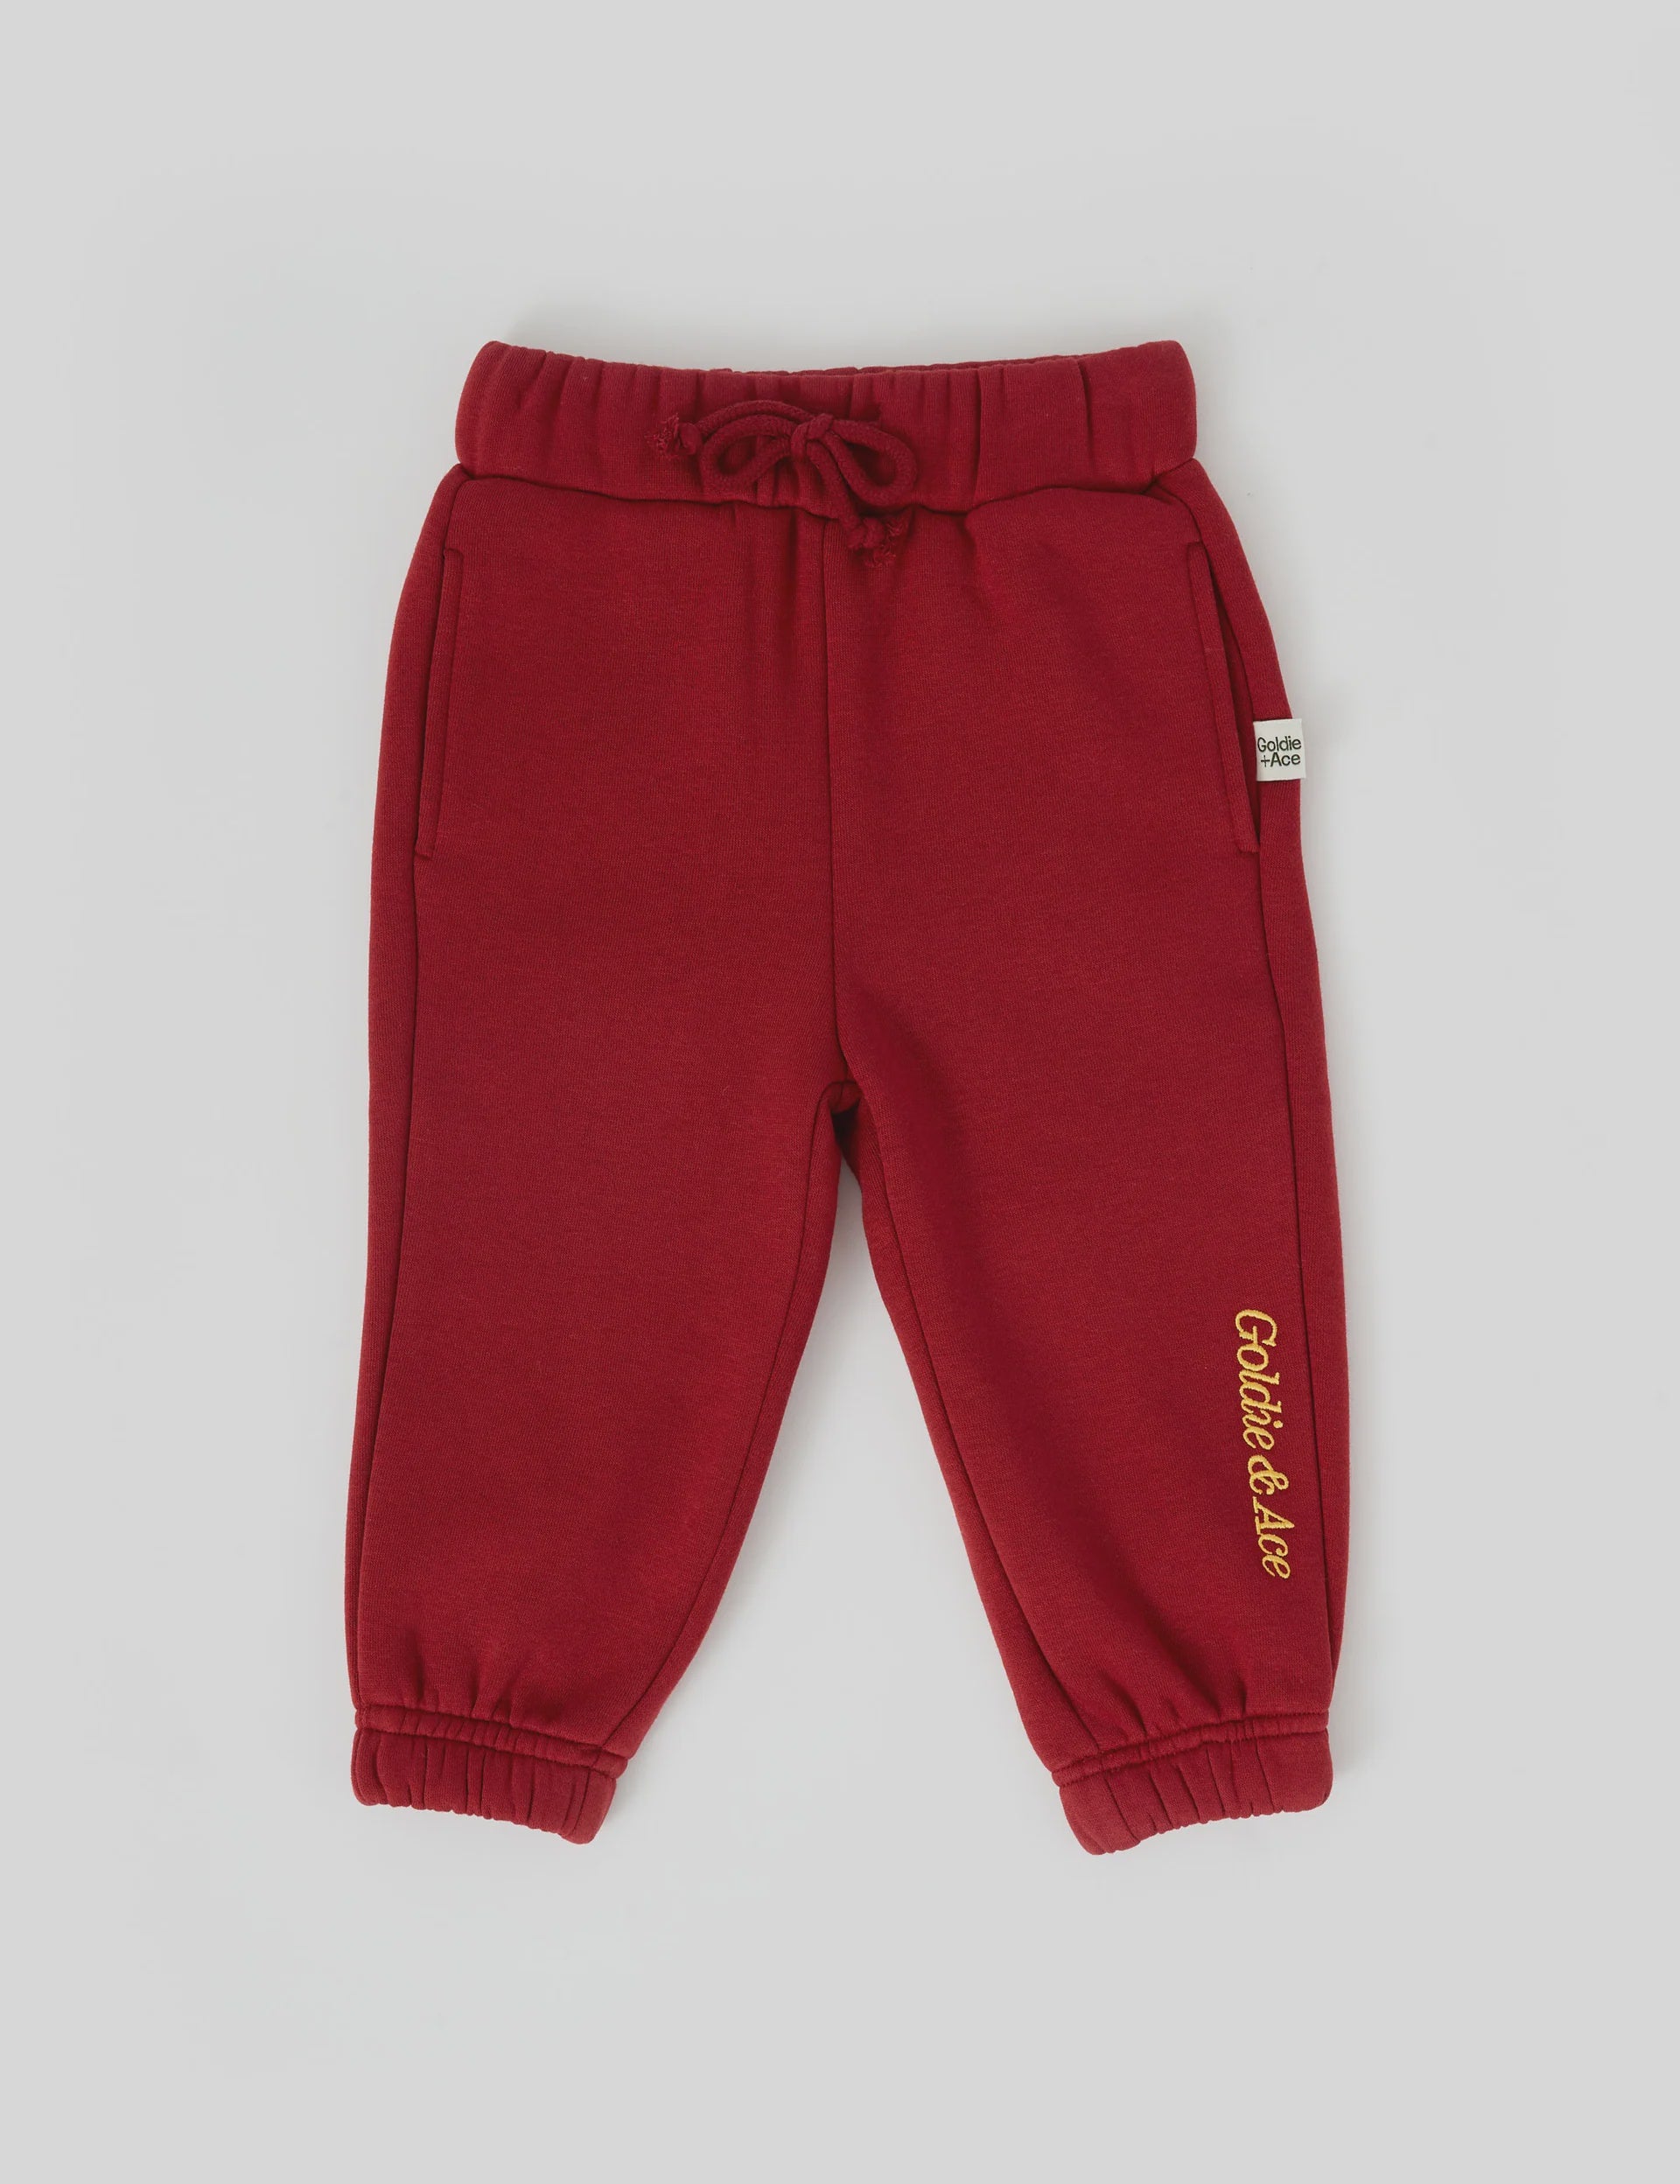 DYLAN SWEATPANTS BRICK | Goldie and Ace